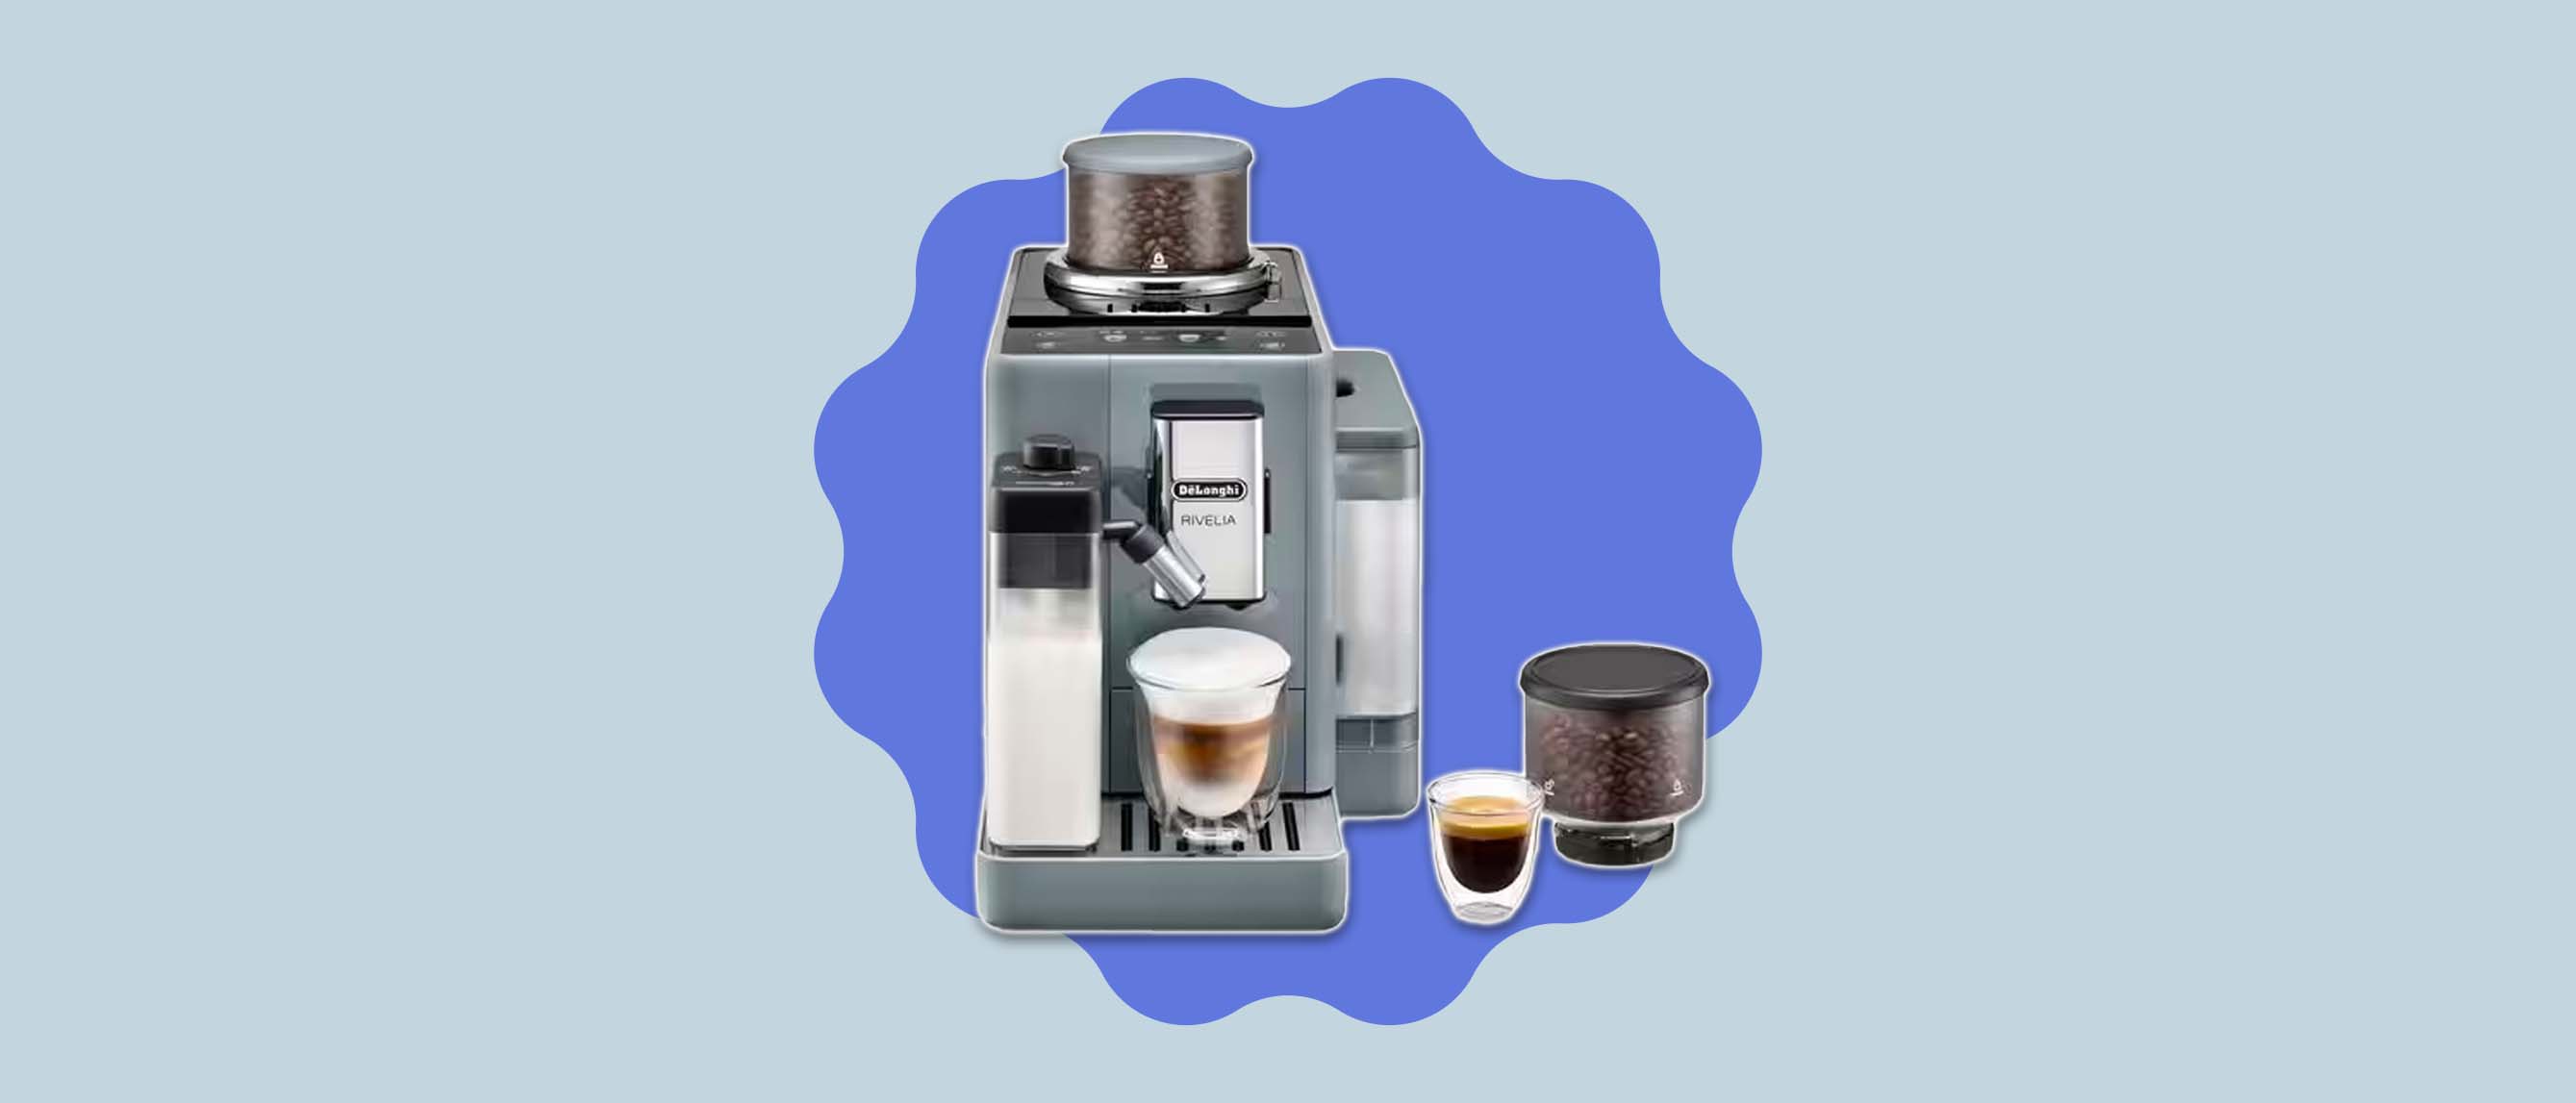 Rivelia wants you to switch to your new coffee experience